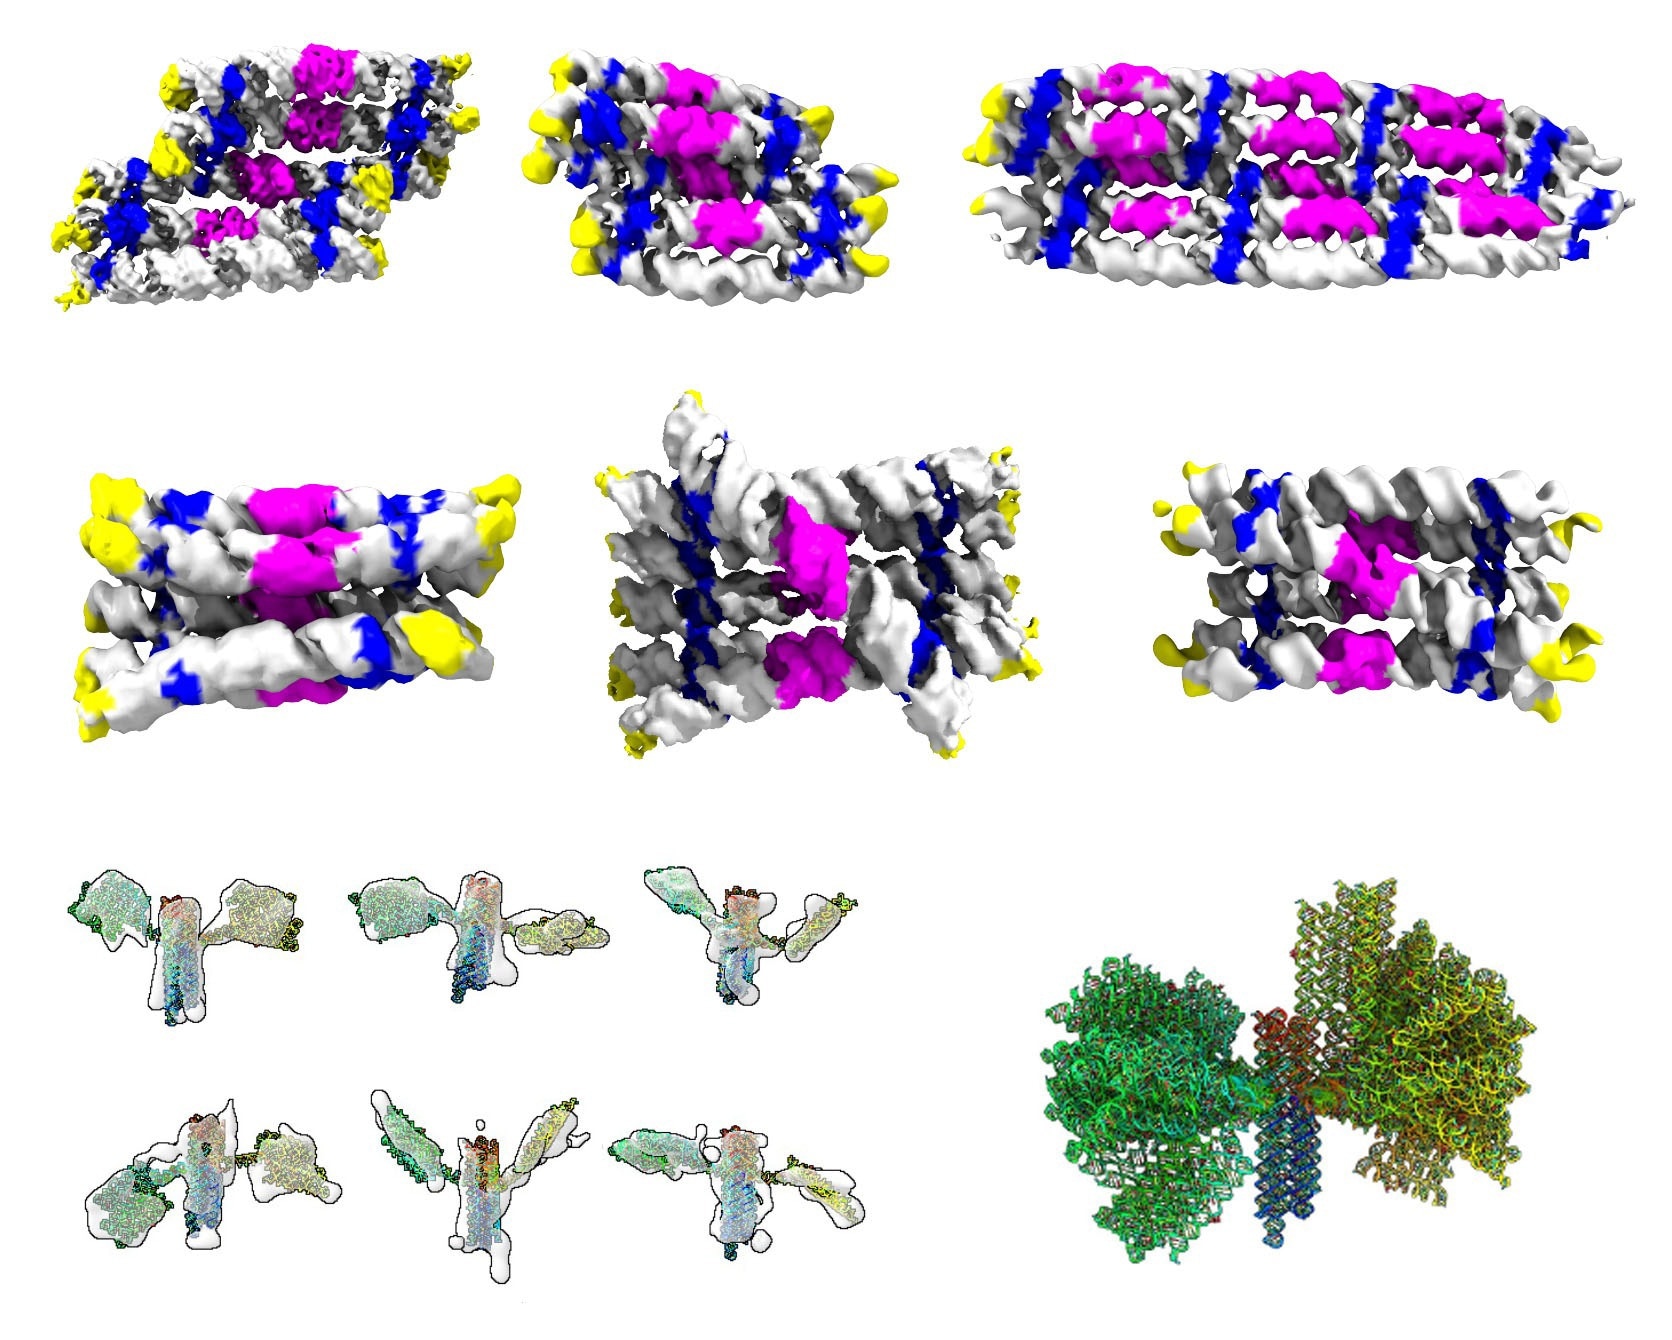 Gallery of the different RNA origami structures that were determined by cryogenic electron microscopy and tomography. Top rows show structures of RNA rectangles and cylinders colored by RNA motifs. Bottom row shows structures of the nanosatellite colored in rainbow in the reading direction of an RNA strand. © Ebbe Sloth Andersen, PhD